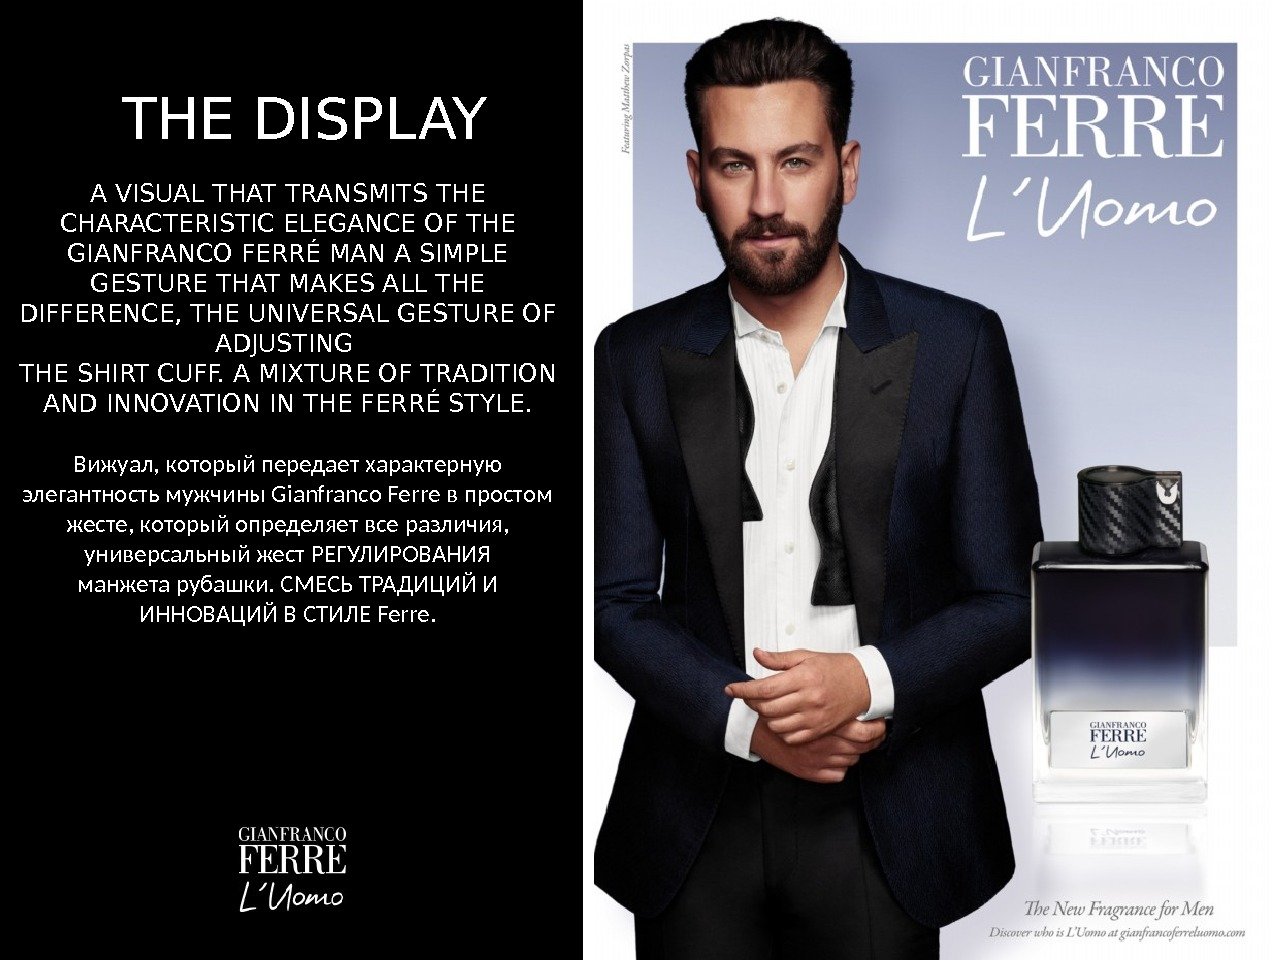 A VISUAL THAT TRANSMITS THE CHARACTERISTIC ELEGANCE OF THE GIANFRANCO FERRÉ MAN A SIMPLE